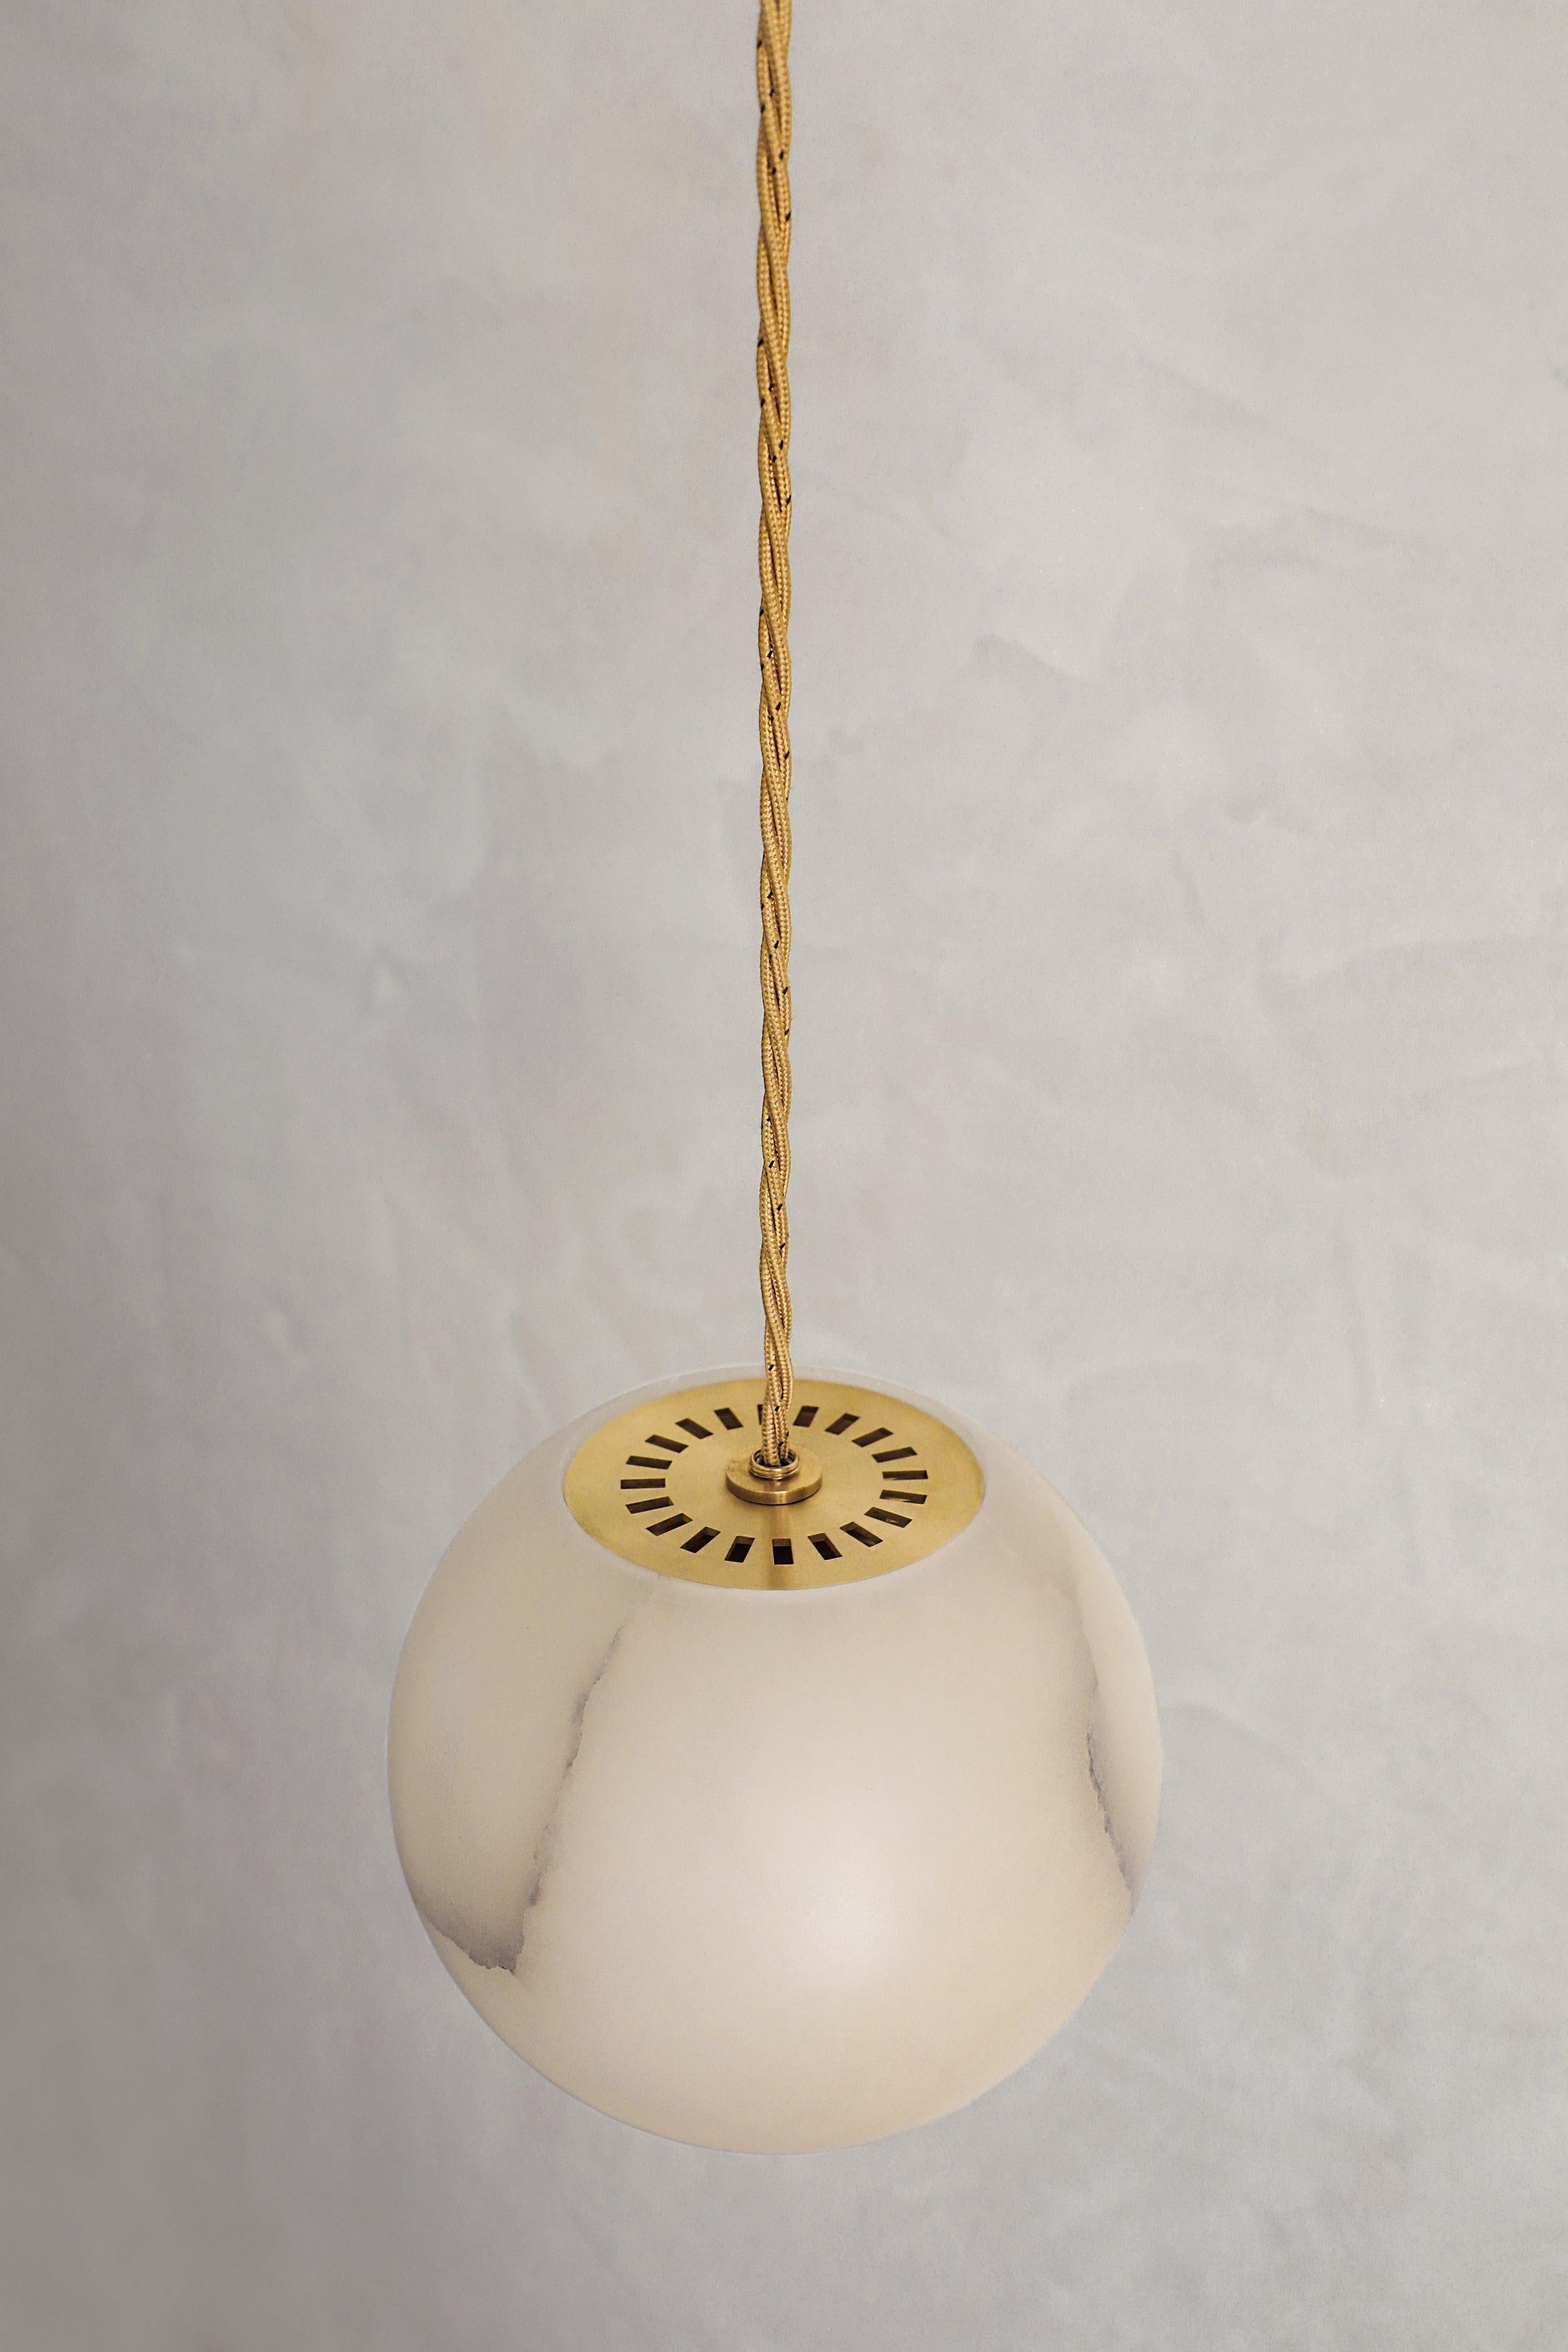 Planette Cable 16.5 Pendant by Contain
Dimensions: Ø 16.5 x H 100 cm (custom lenght).
Materials: Alabaster, brass, optical lens.

Also available in different finishes and dimensions (Ø12 cm / Ø16,5 cm / Ø18 cm x custom length). Please contact